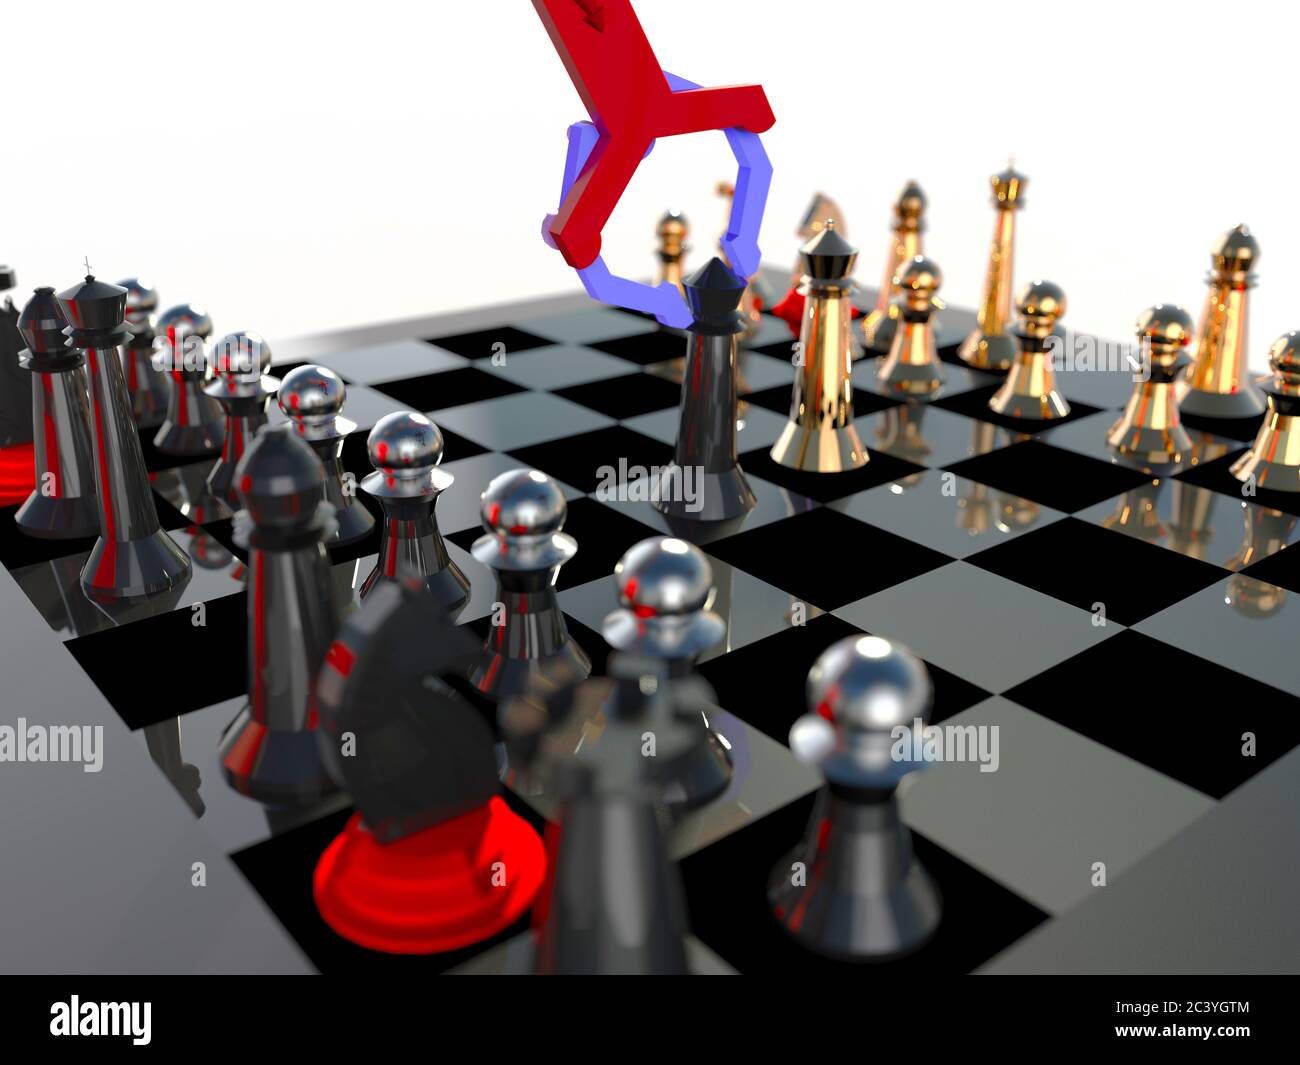 867 3d Chess Stock Photos - Free & Royalty-Free Stock Photos from Dreamstime